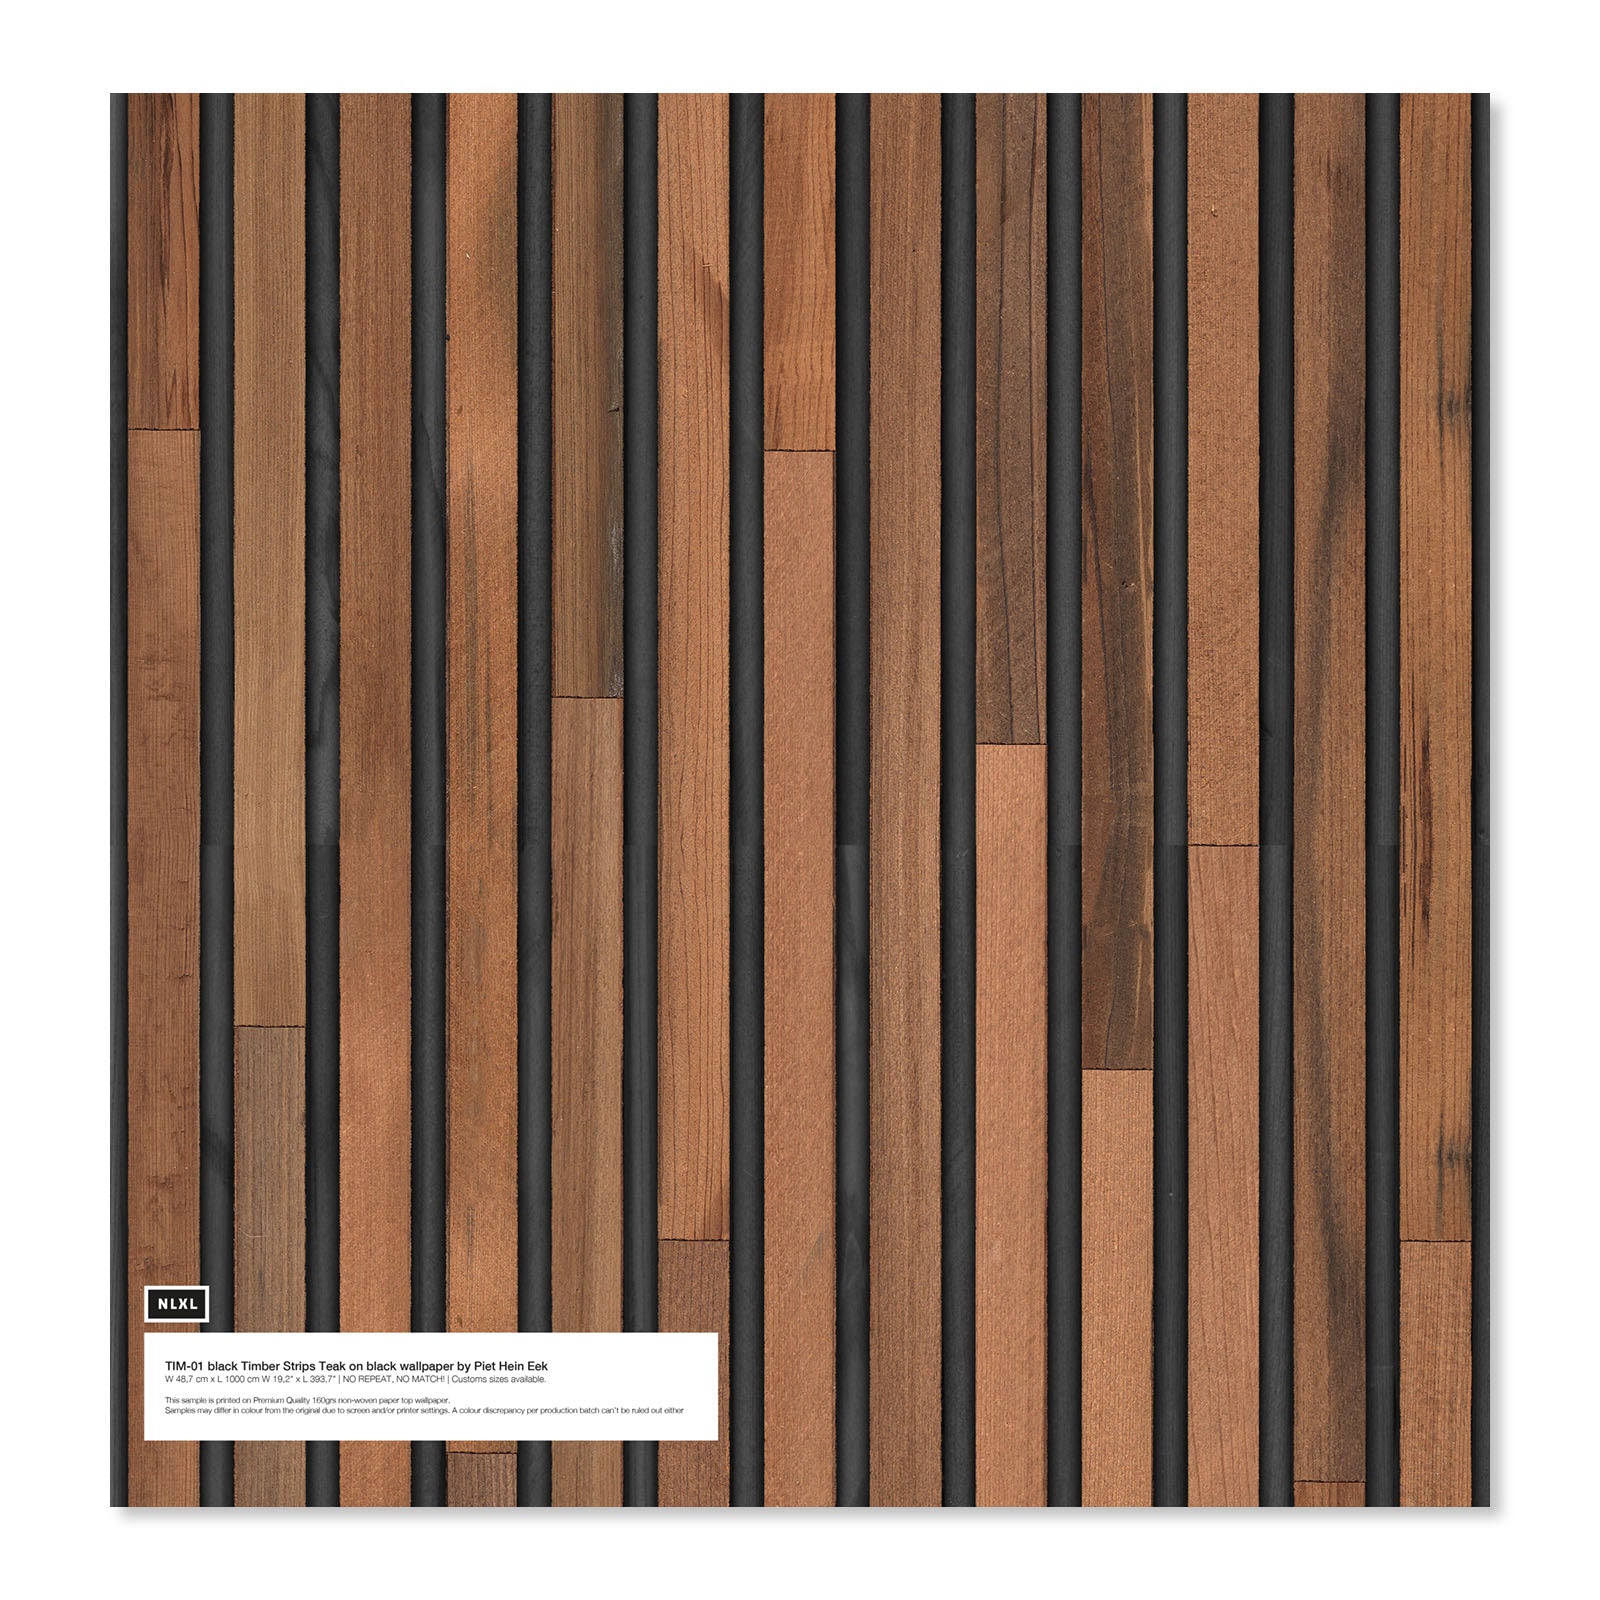 Texture of Teak Wood Wallpaper Background Stock Image - Image of wood,  table: 101602987